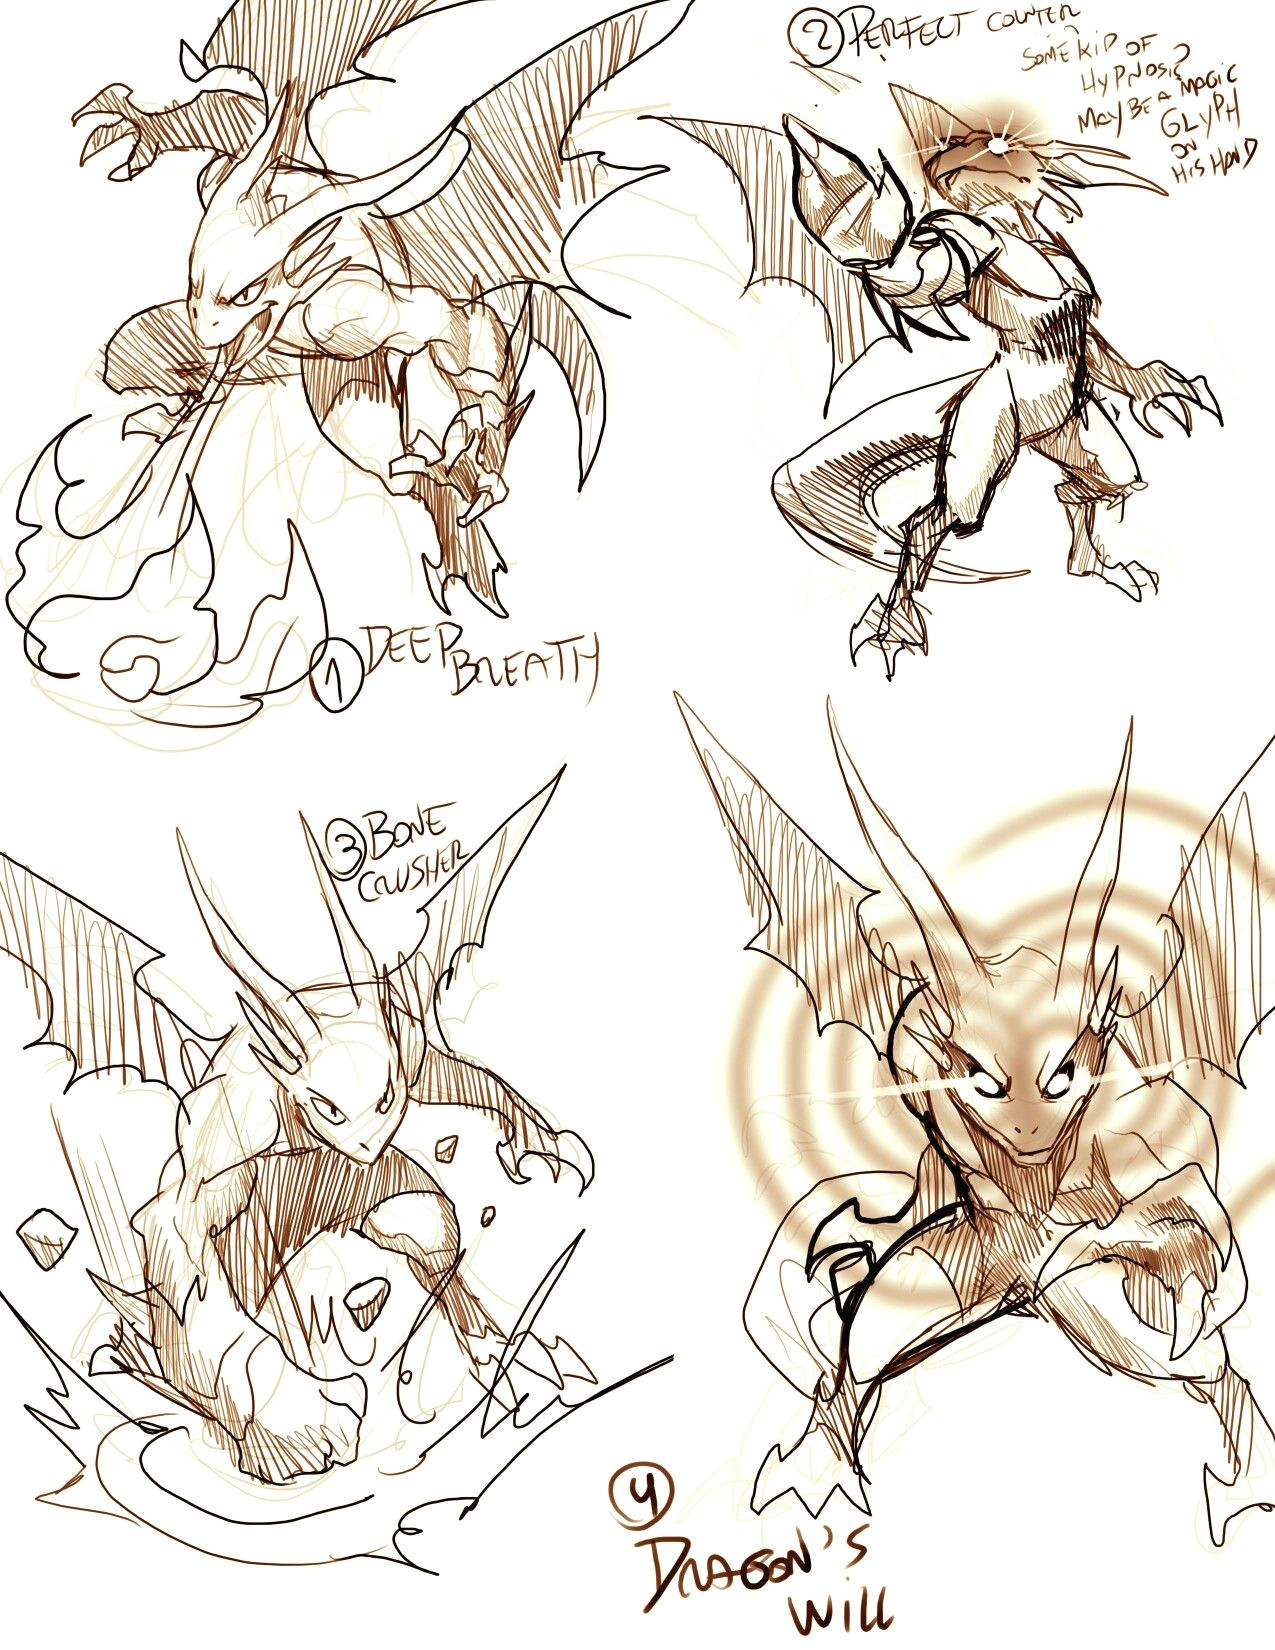 anthro dragon battle poses positions text attacks how to draw manga anime